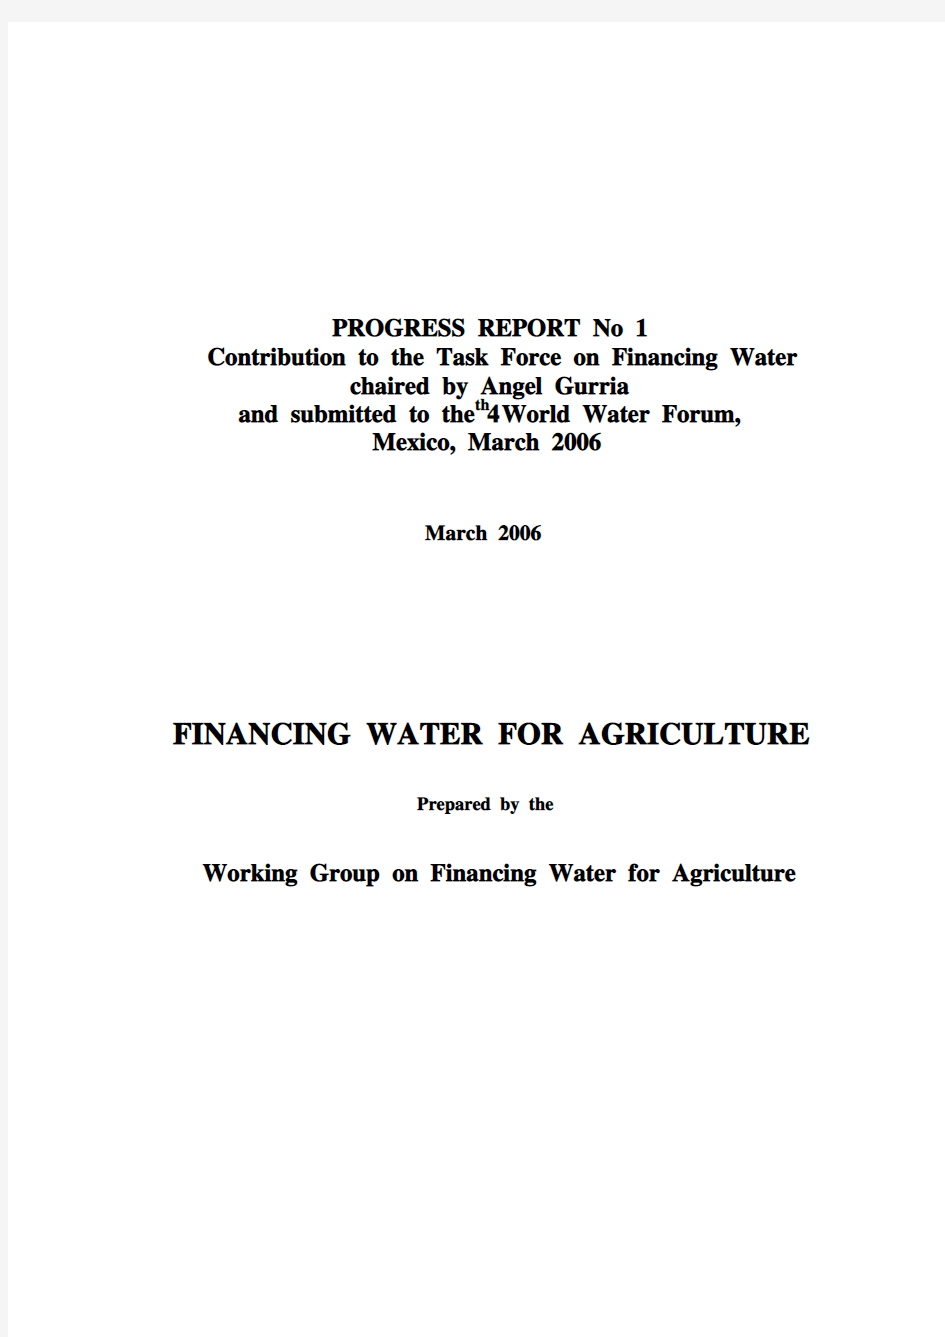 Finacing Water for Agriculture